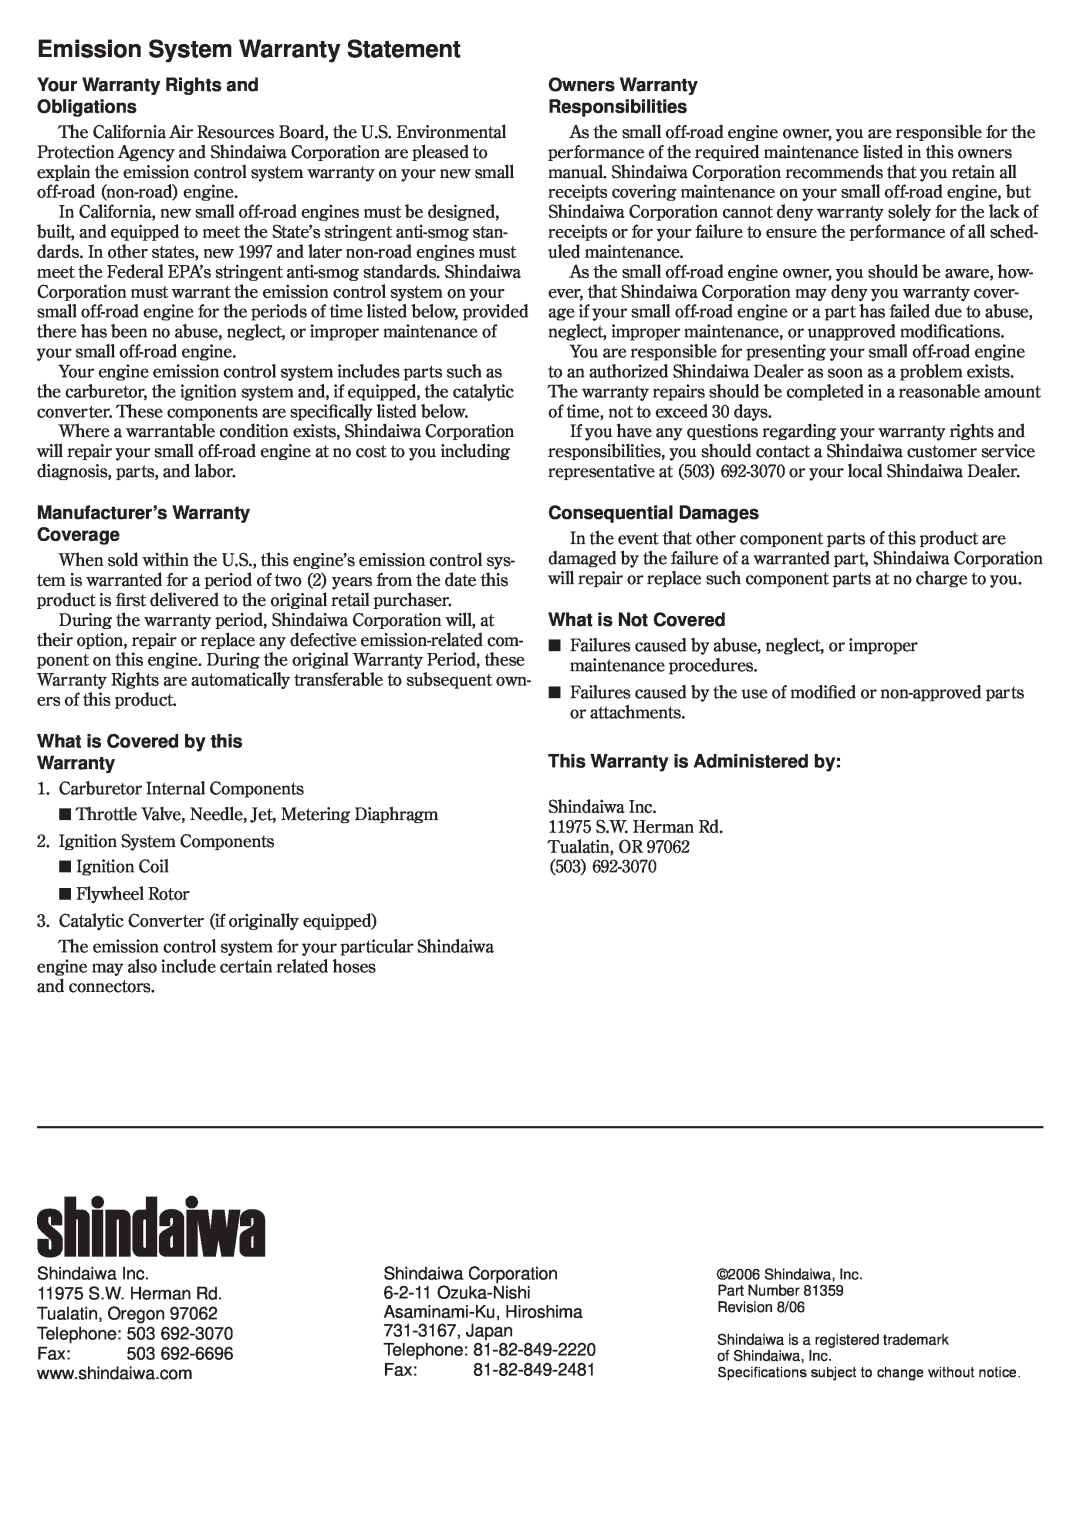 Shindaiwa 81359 Emission System Warranty Statement, Your Warranty Rights and Obligations, Owners Warranty Responsibilities 